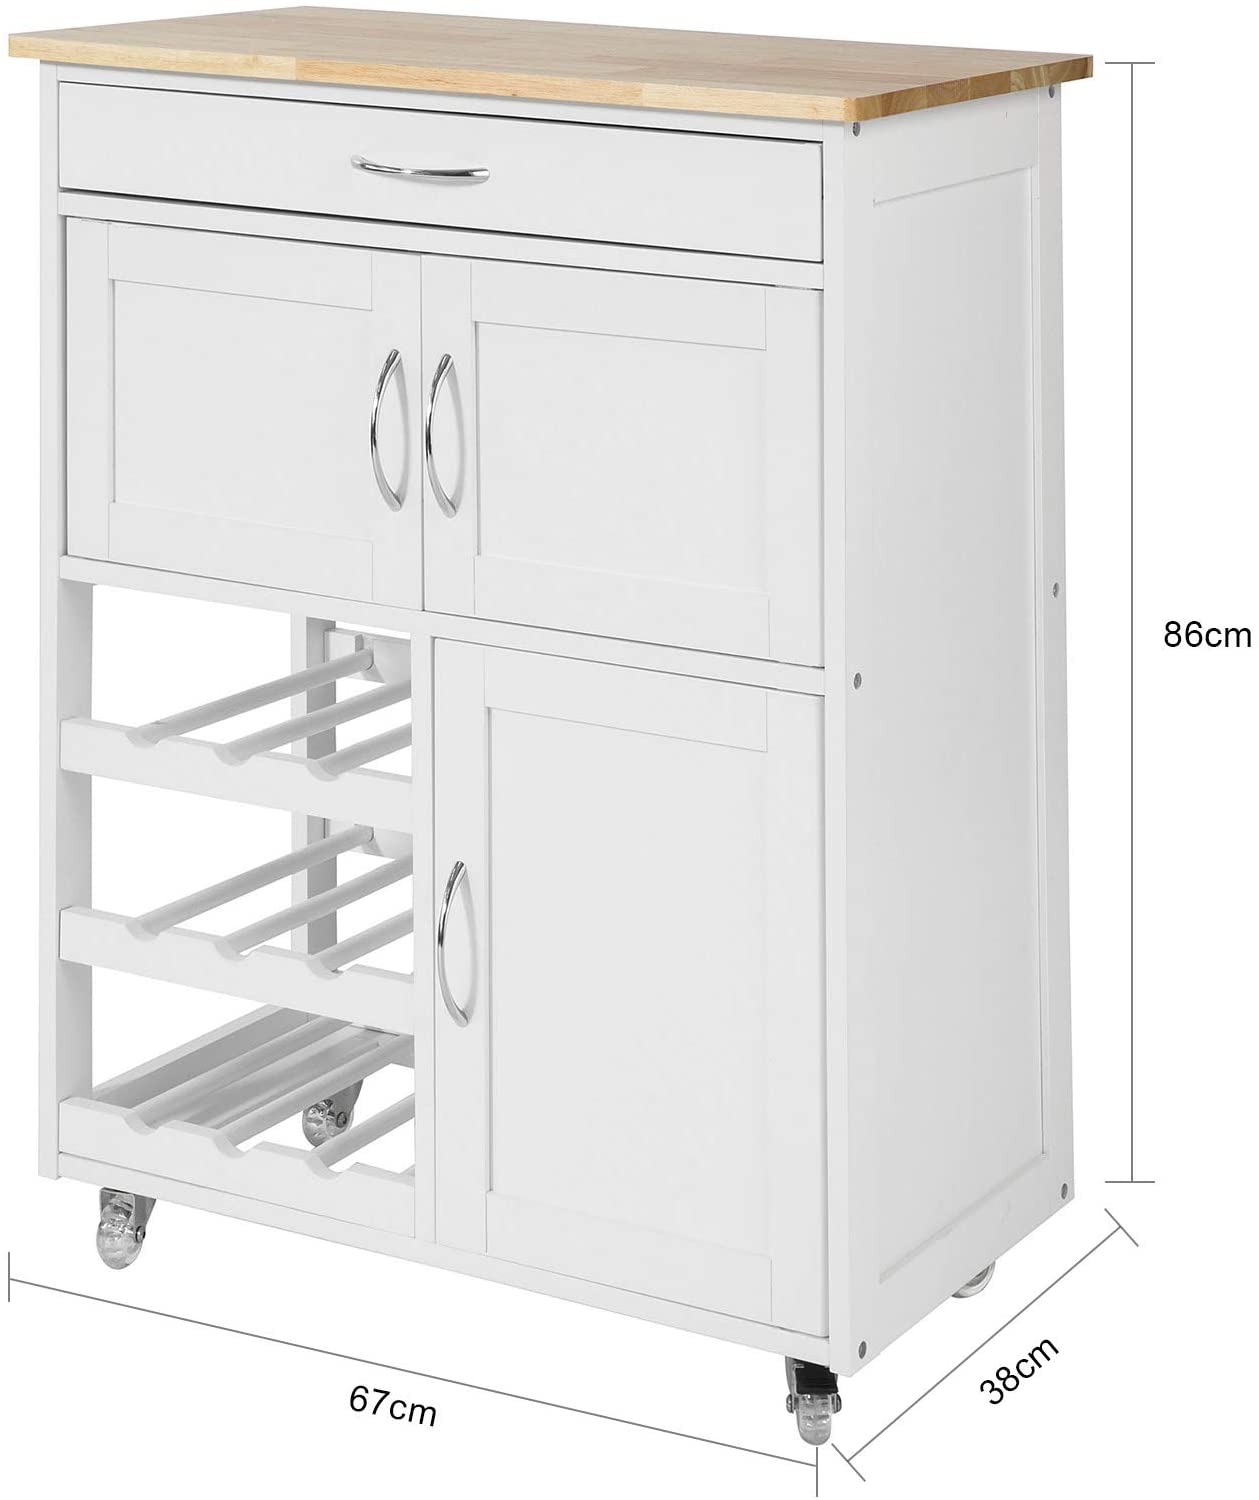 Kitchen Trolley with Wine Racks, Portable Workbench and Serving Cart for Bar or Dining - image6